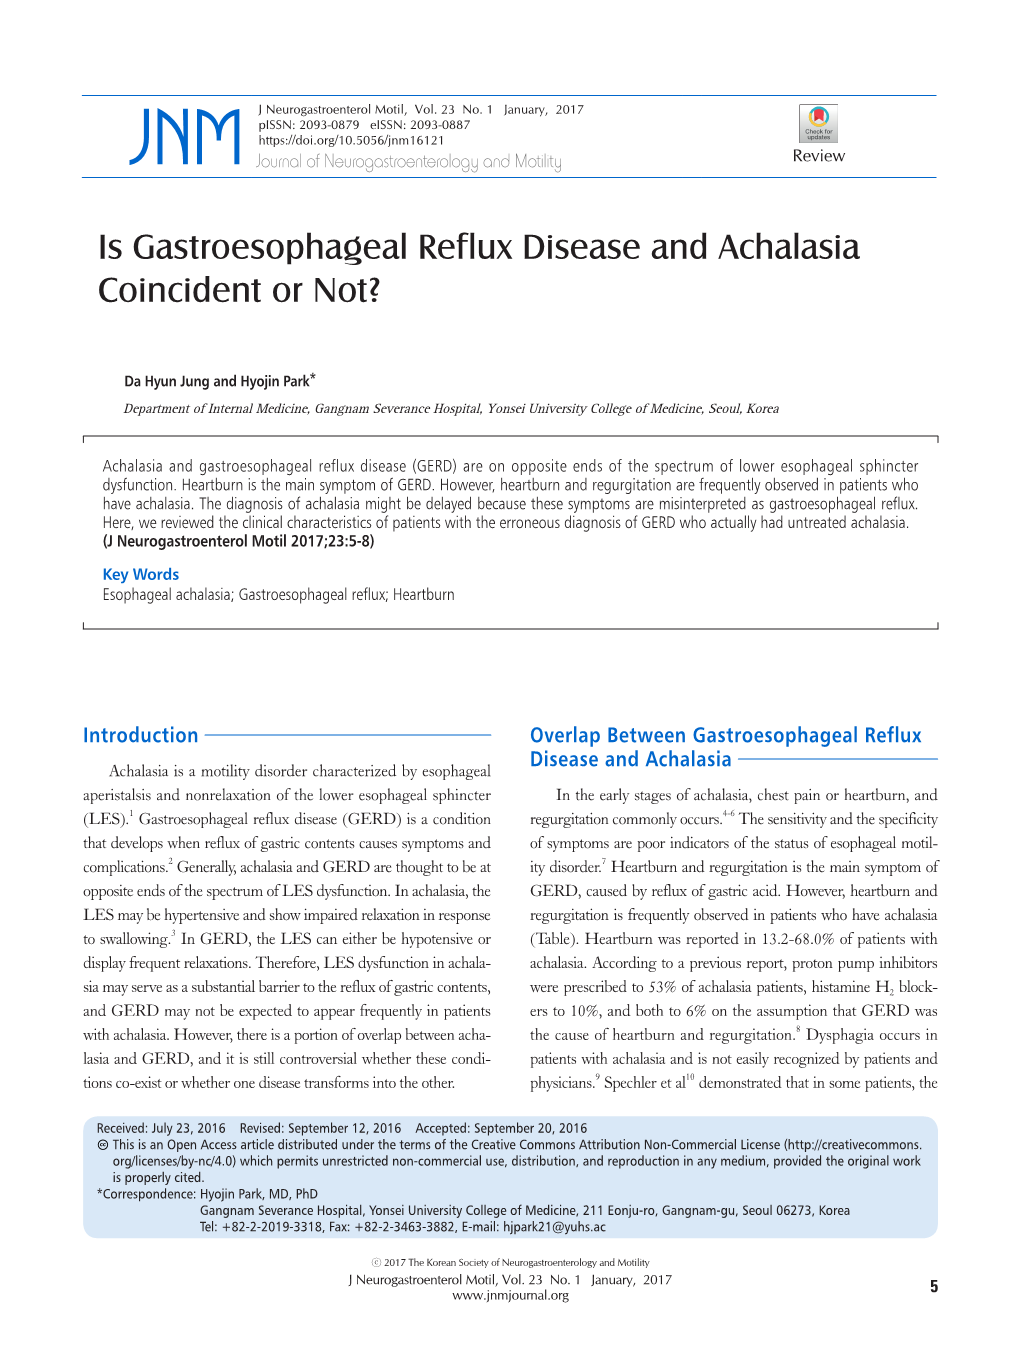 Is Gastroesophageal Reflux Disease and Achalasia Coincident Or Not?